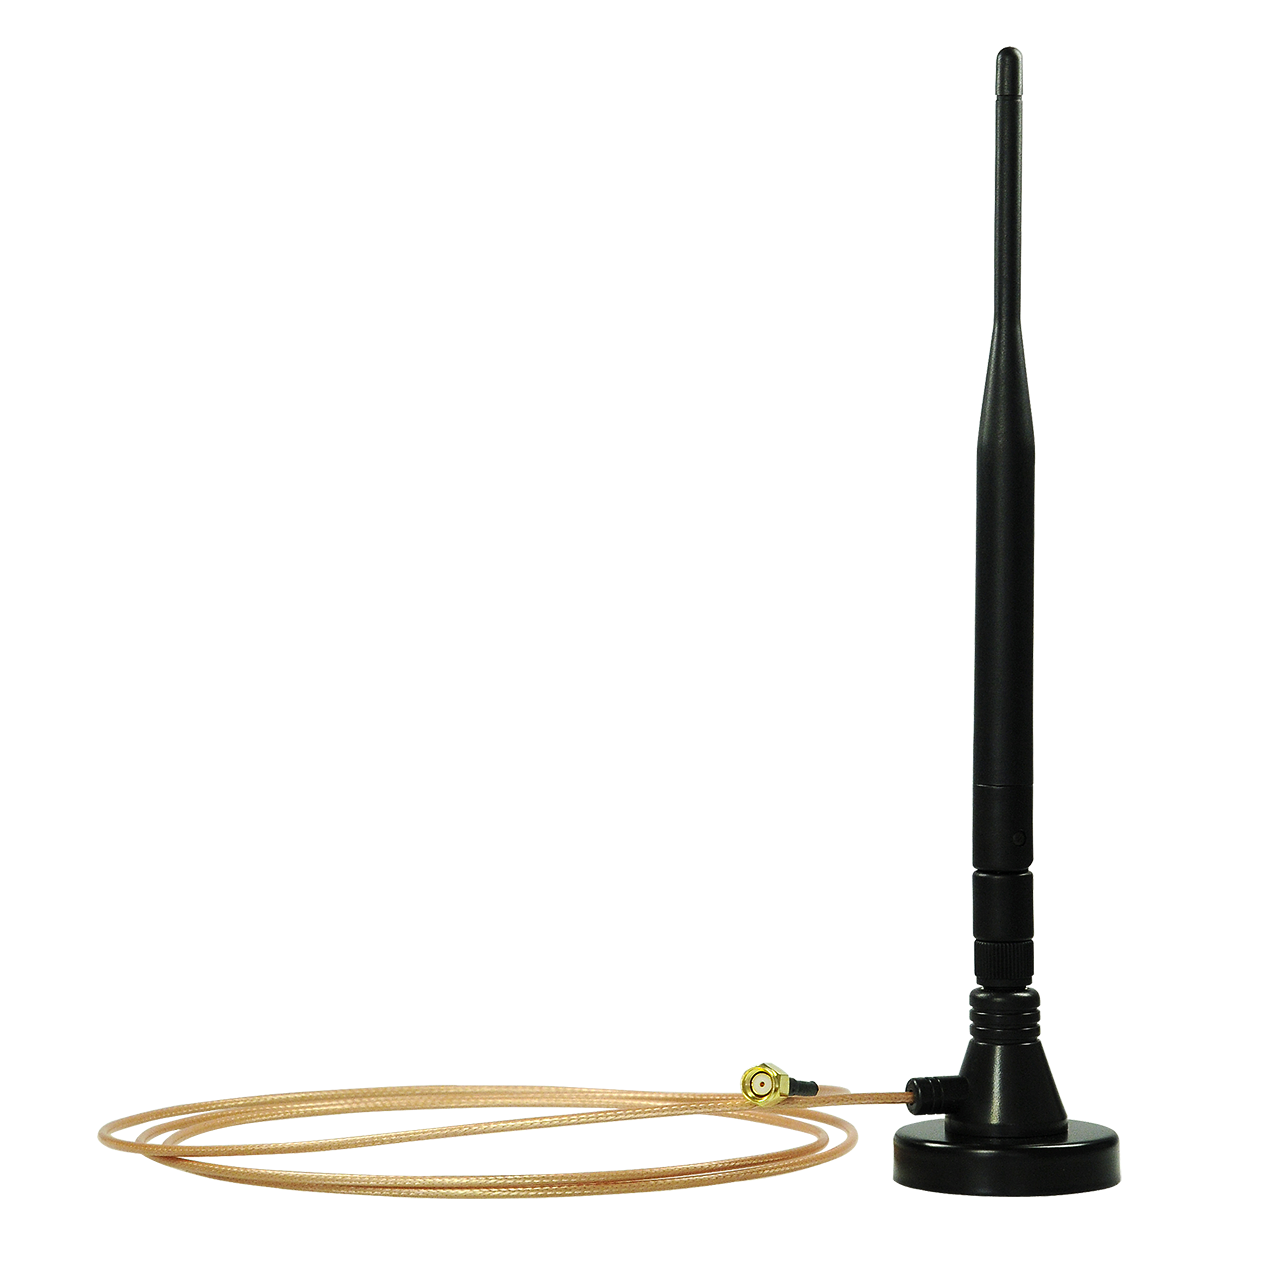 Helmholz 2.4 Ghz Antena con Base Magnetica , 5dBi , 1.5 m cable,conector RP-SMA male 700-889-ANT01